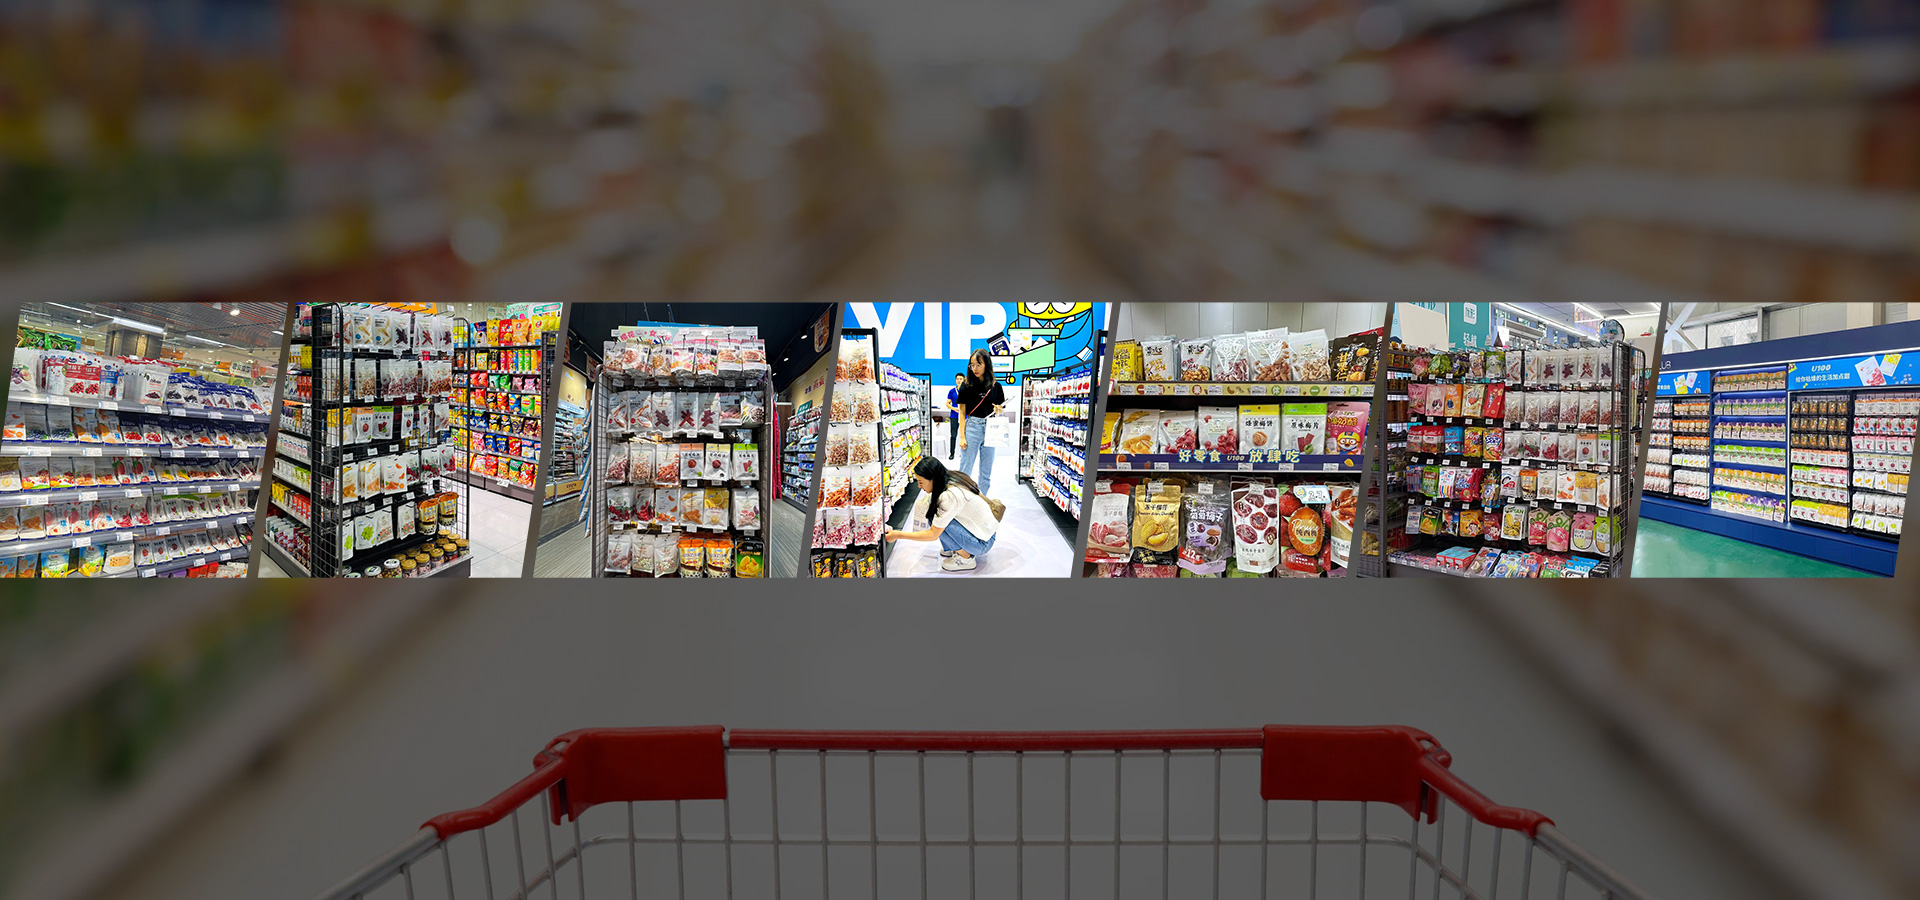 Our brand specializes in high-end convenience stores